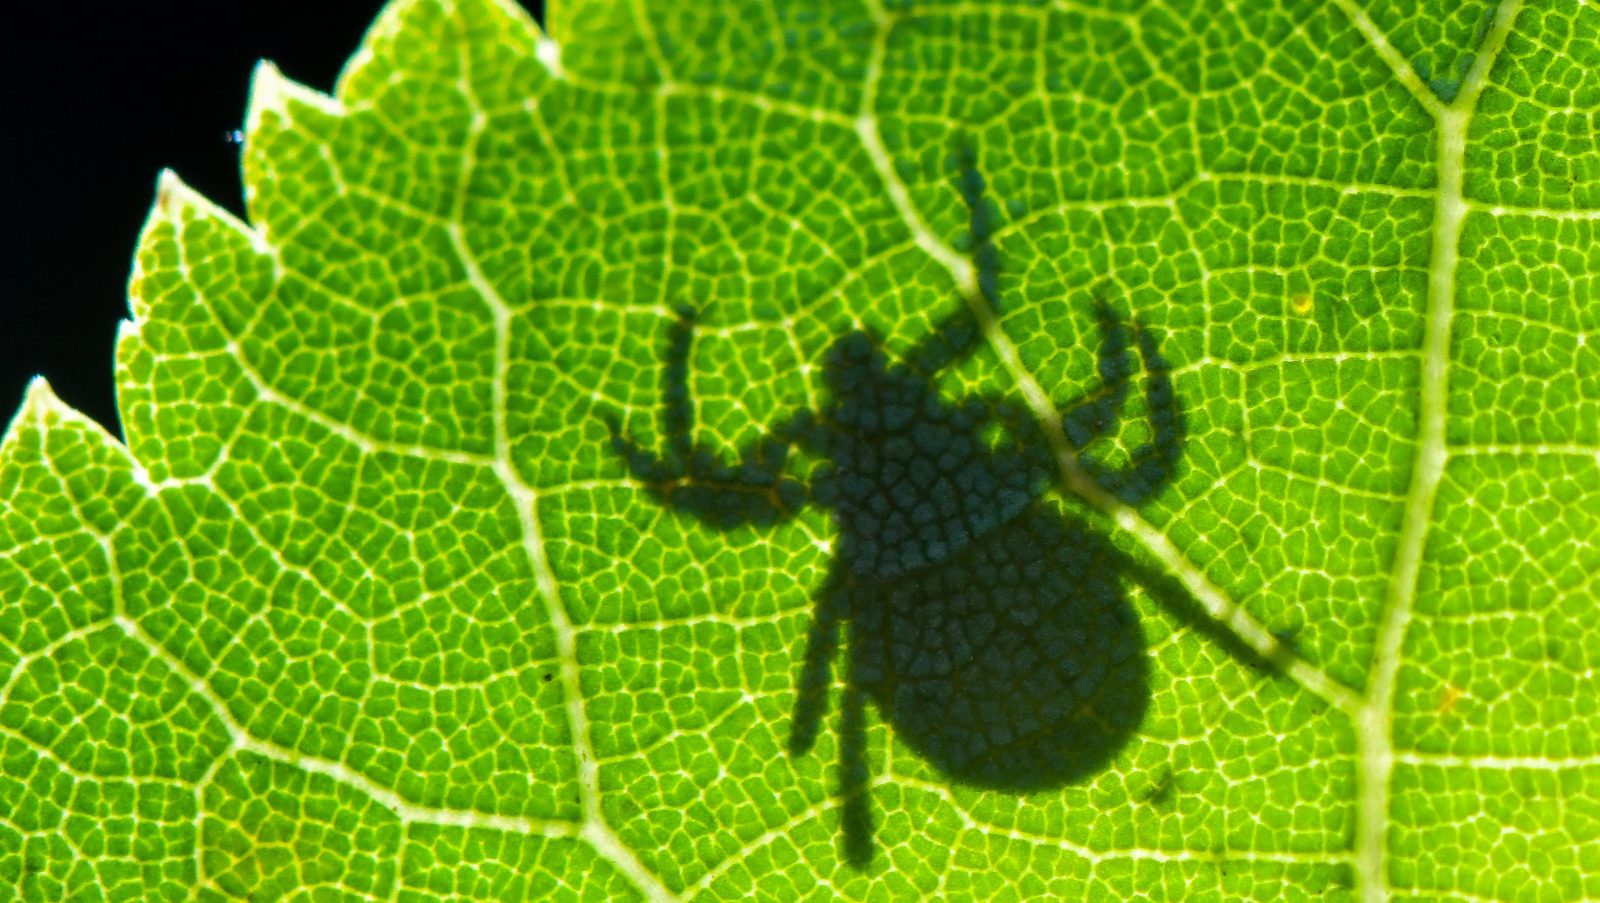 The shadow of a tick appears on a green leaf.